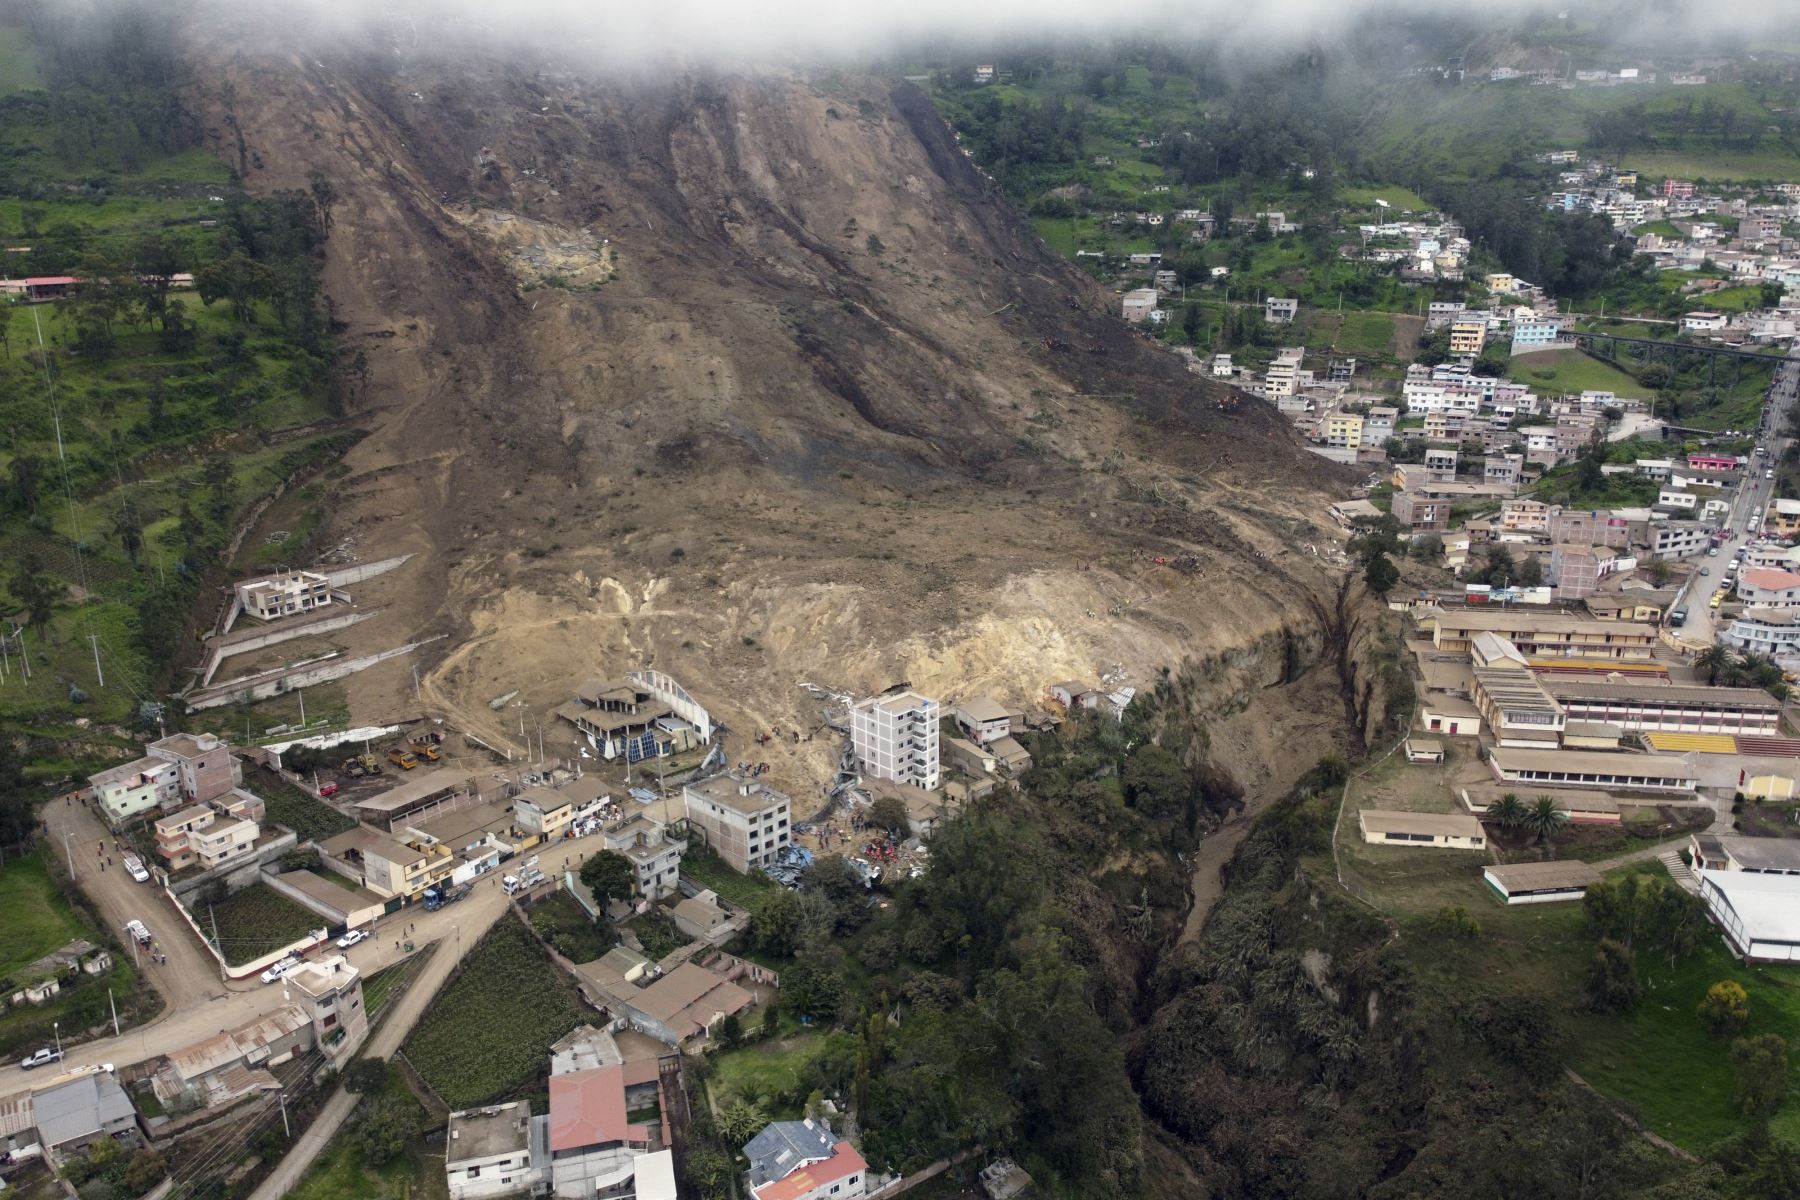 The toe of the very large 26 March 2023 landslide at Alausí in Ecuador.